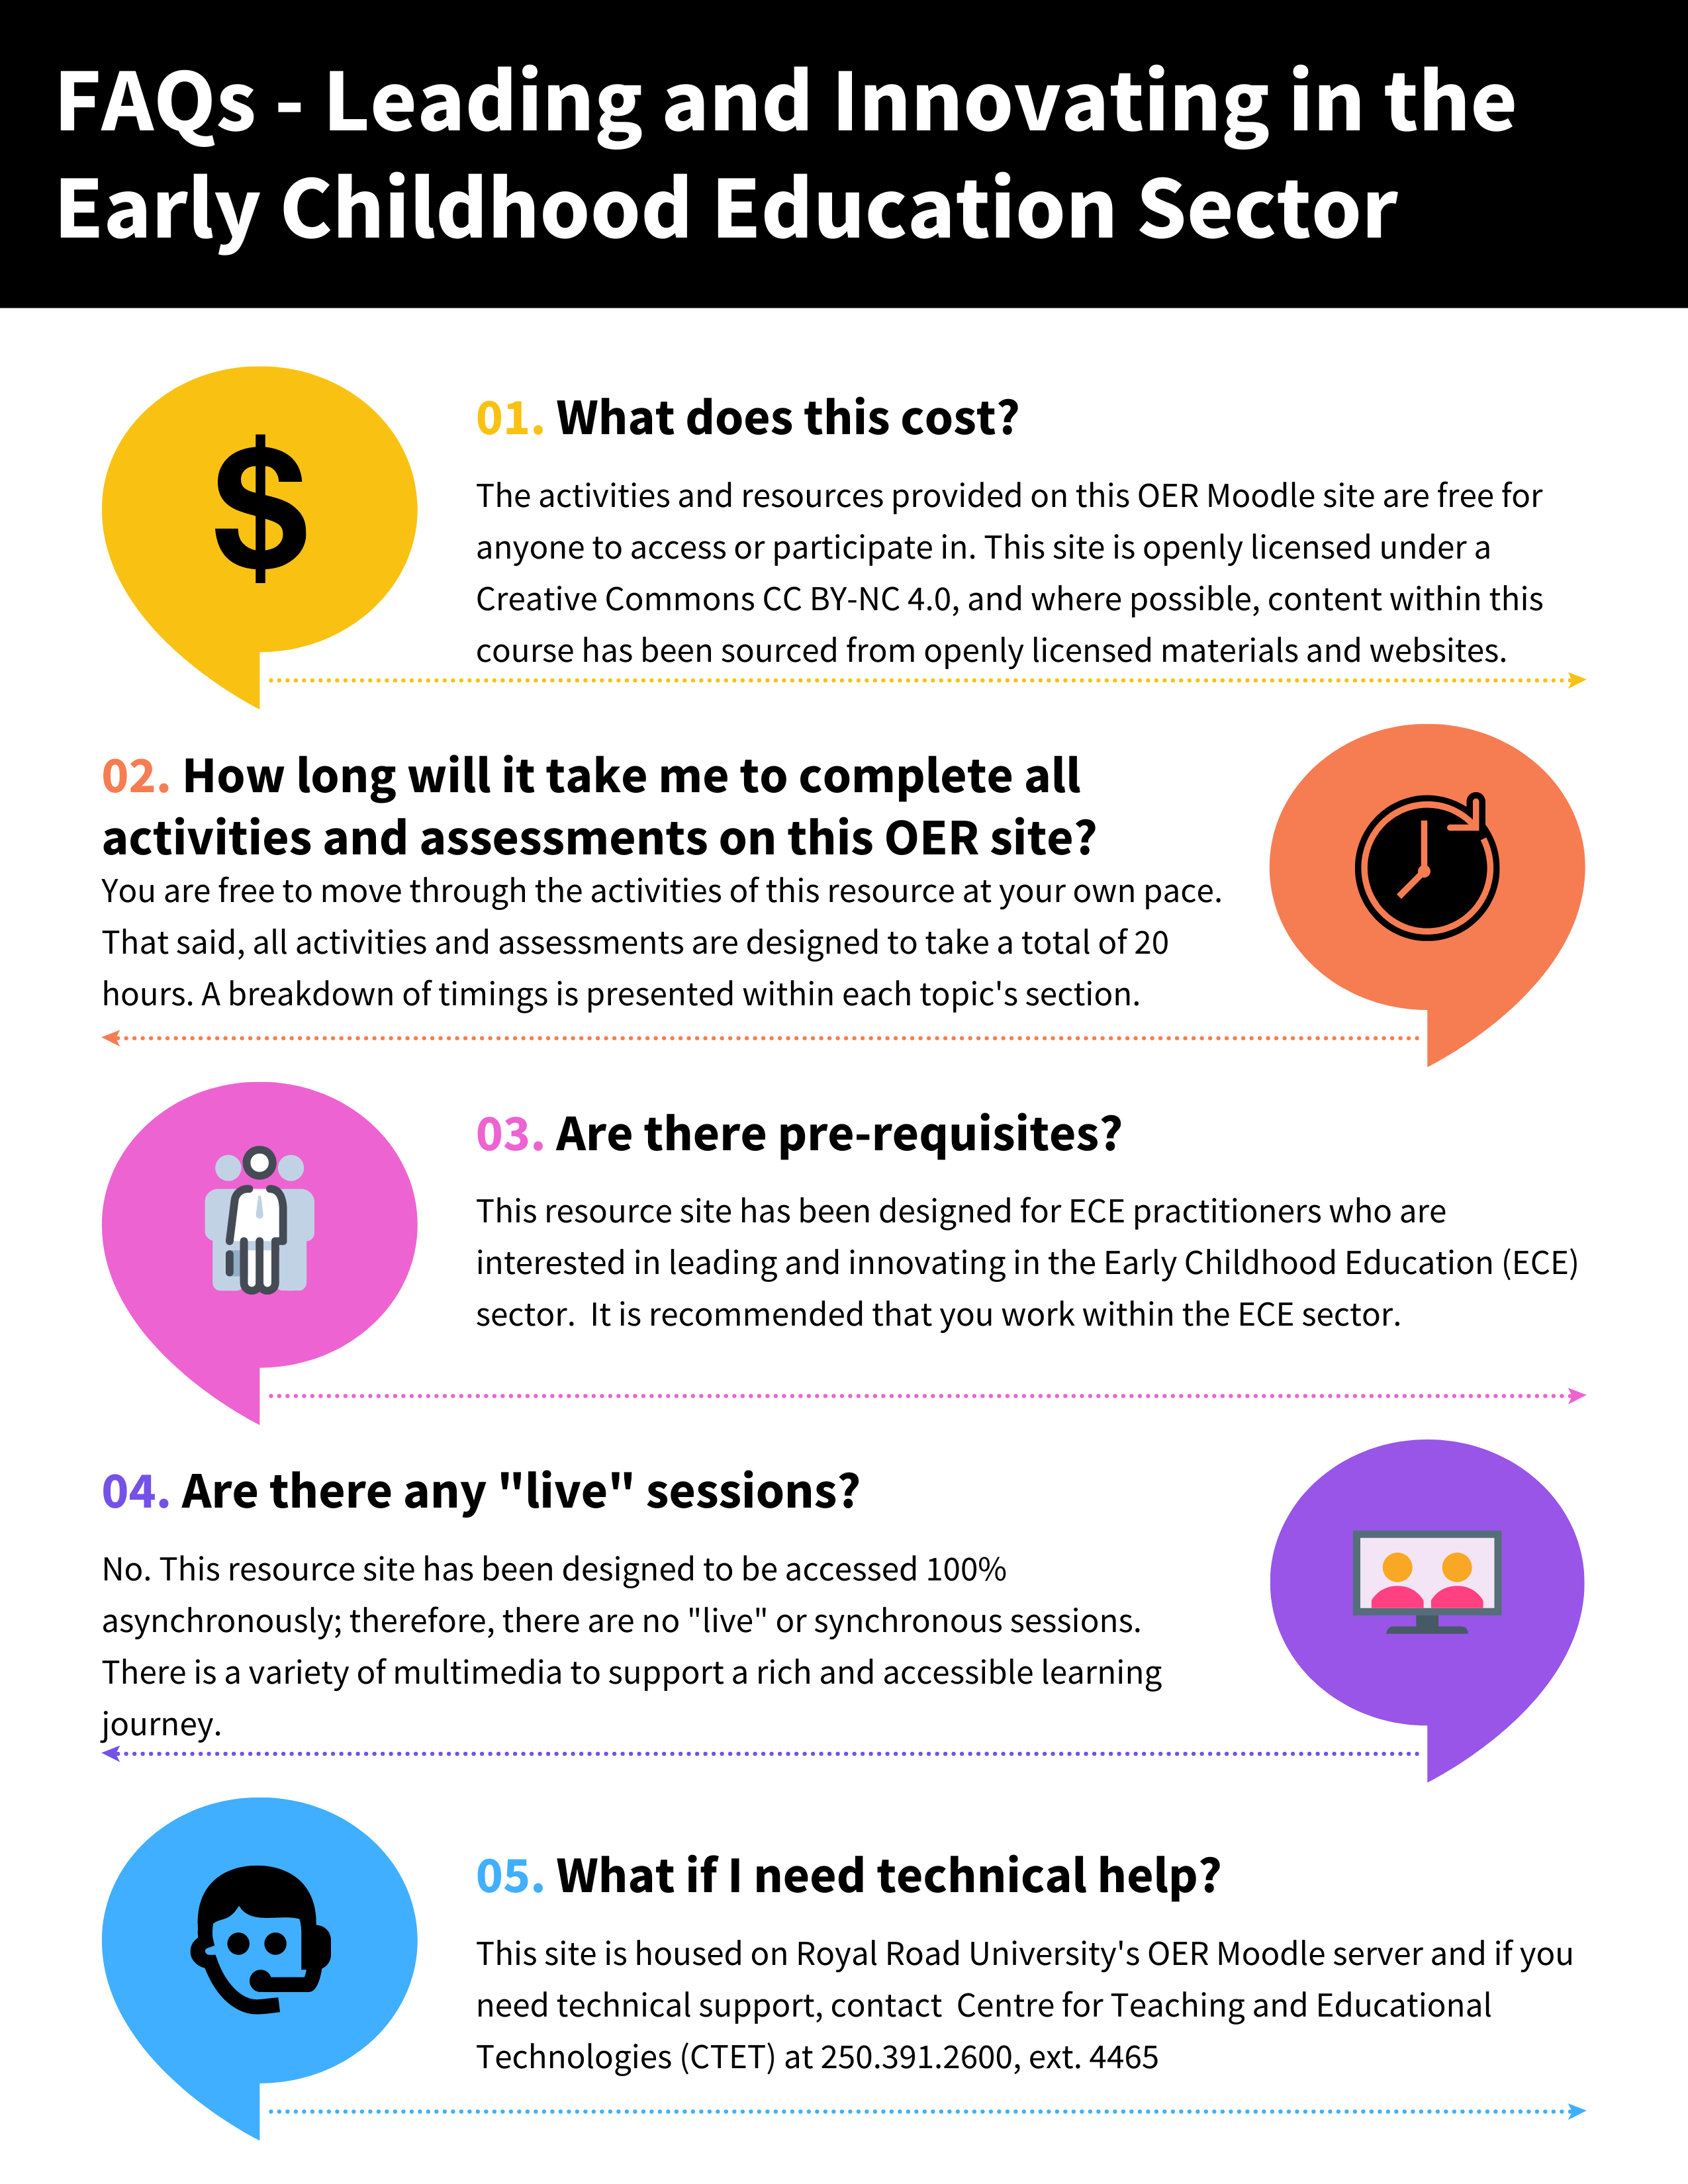 An infographic displaying five frequently asked questions about this OER site. 